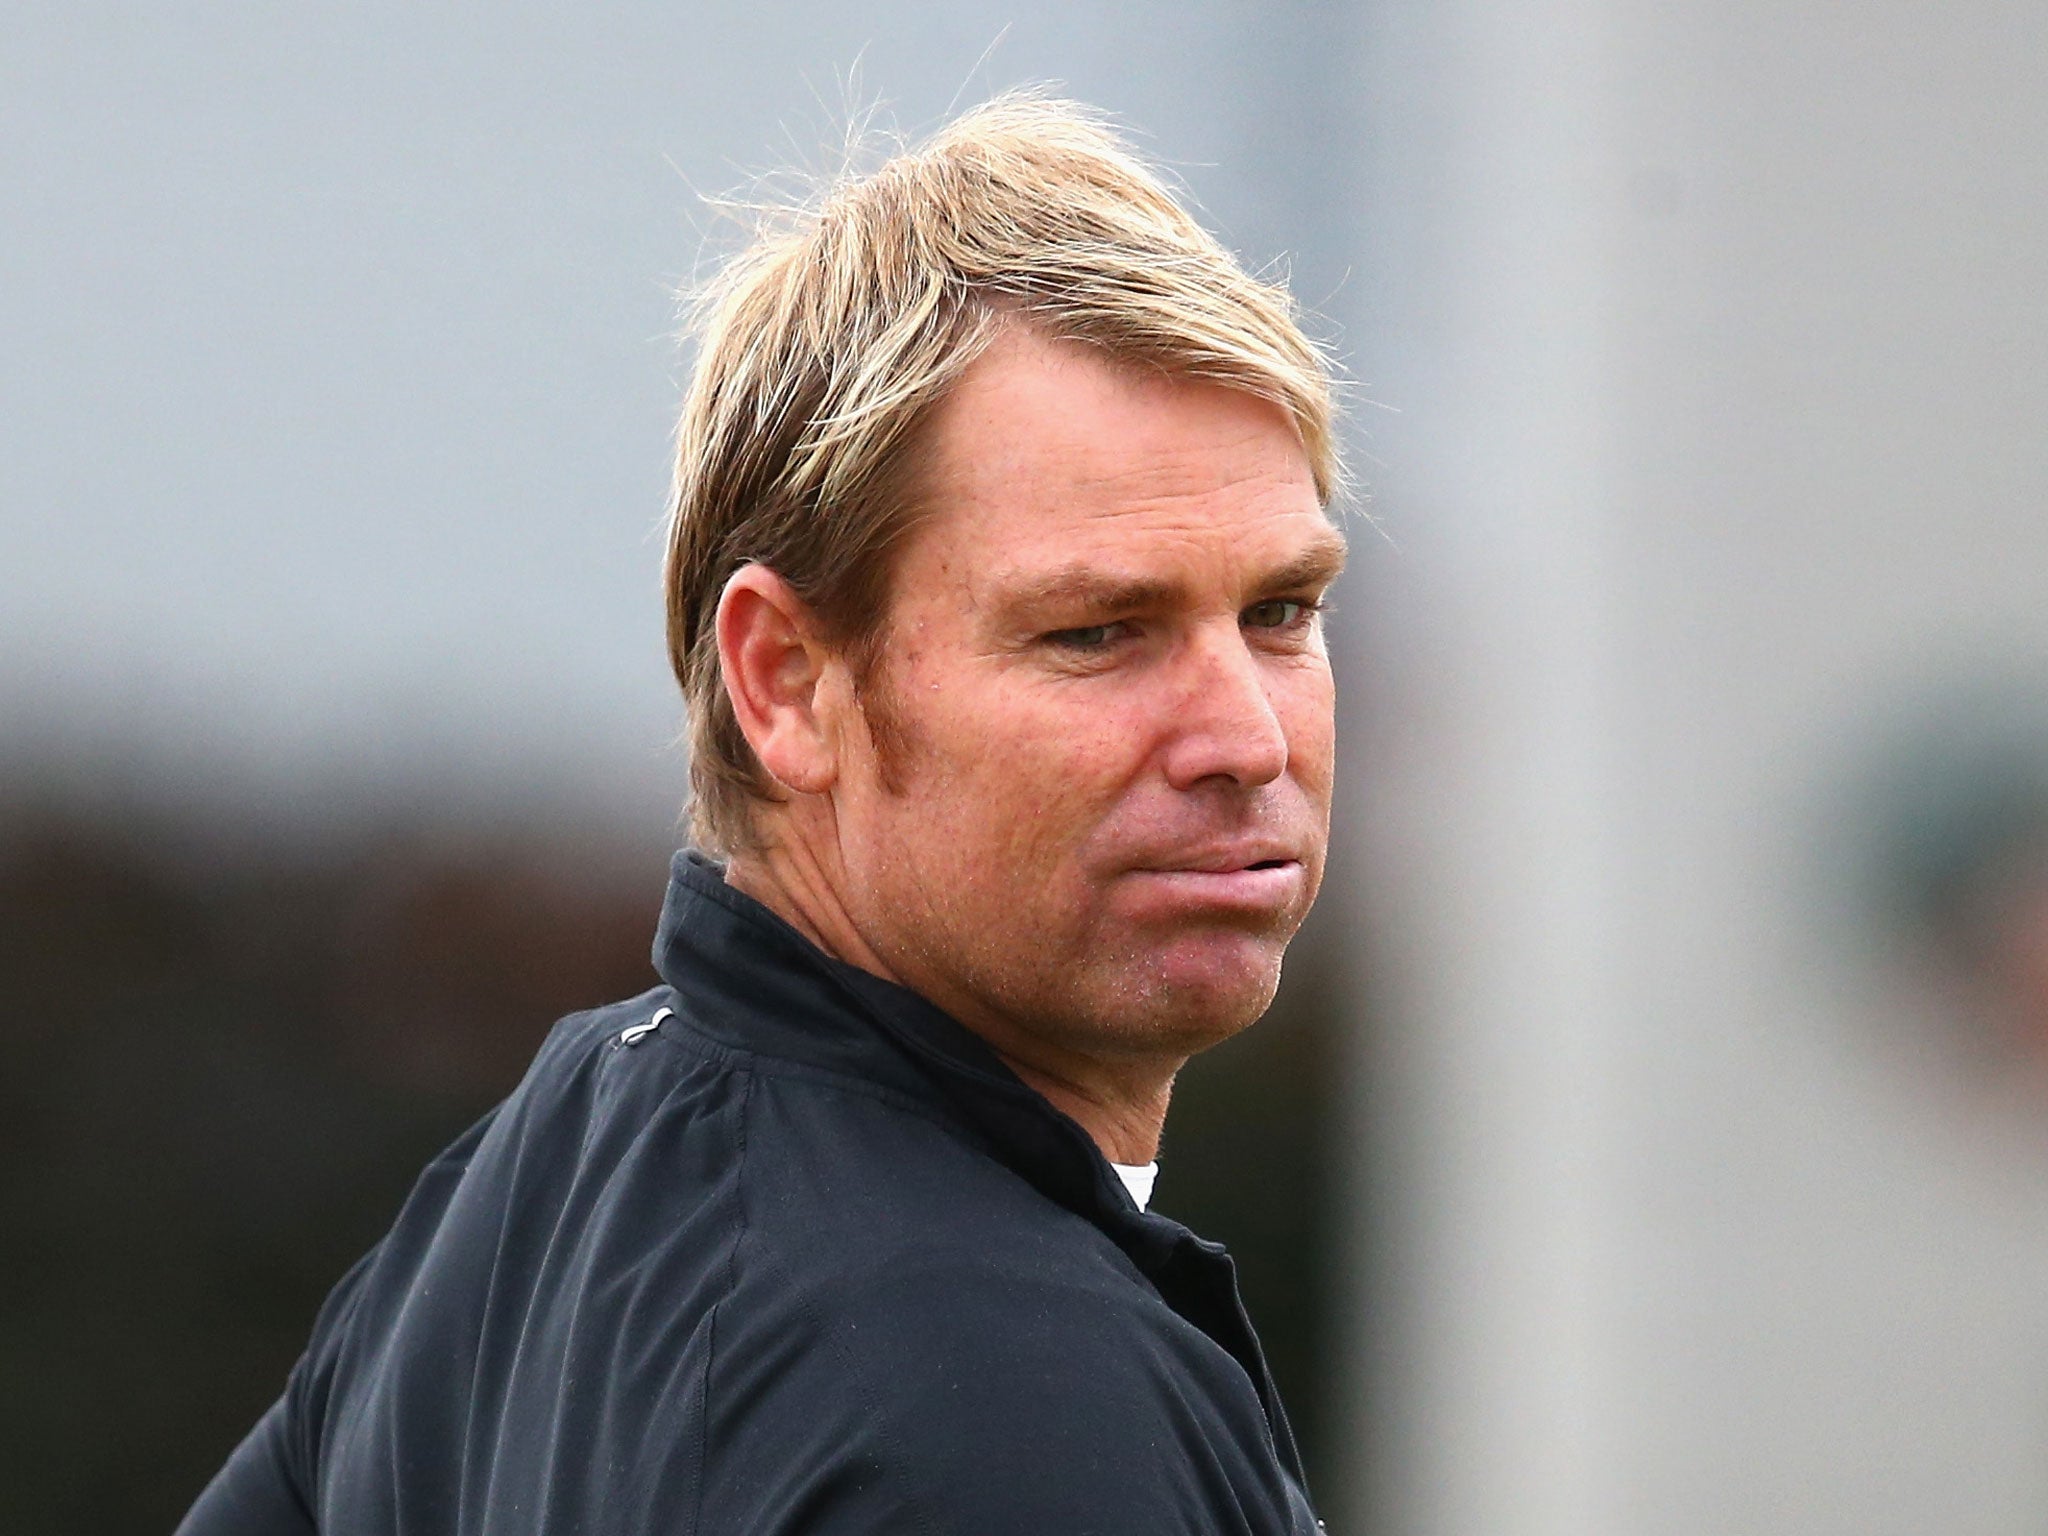 Shane Warne said Australia’s Michael Clarke was ‘the best captain in the world now’